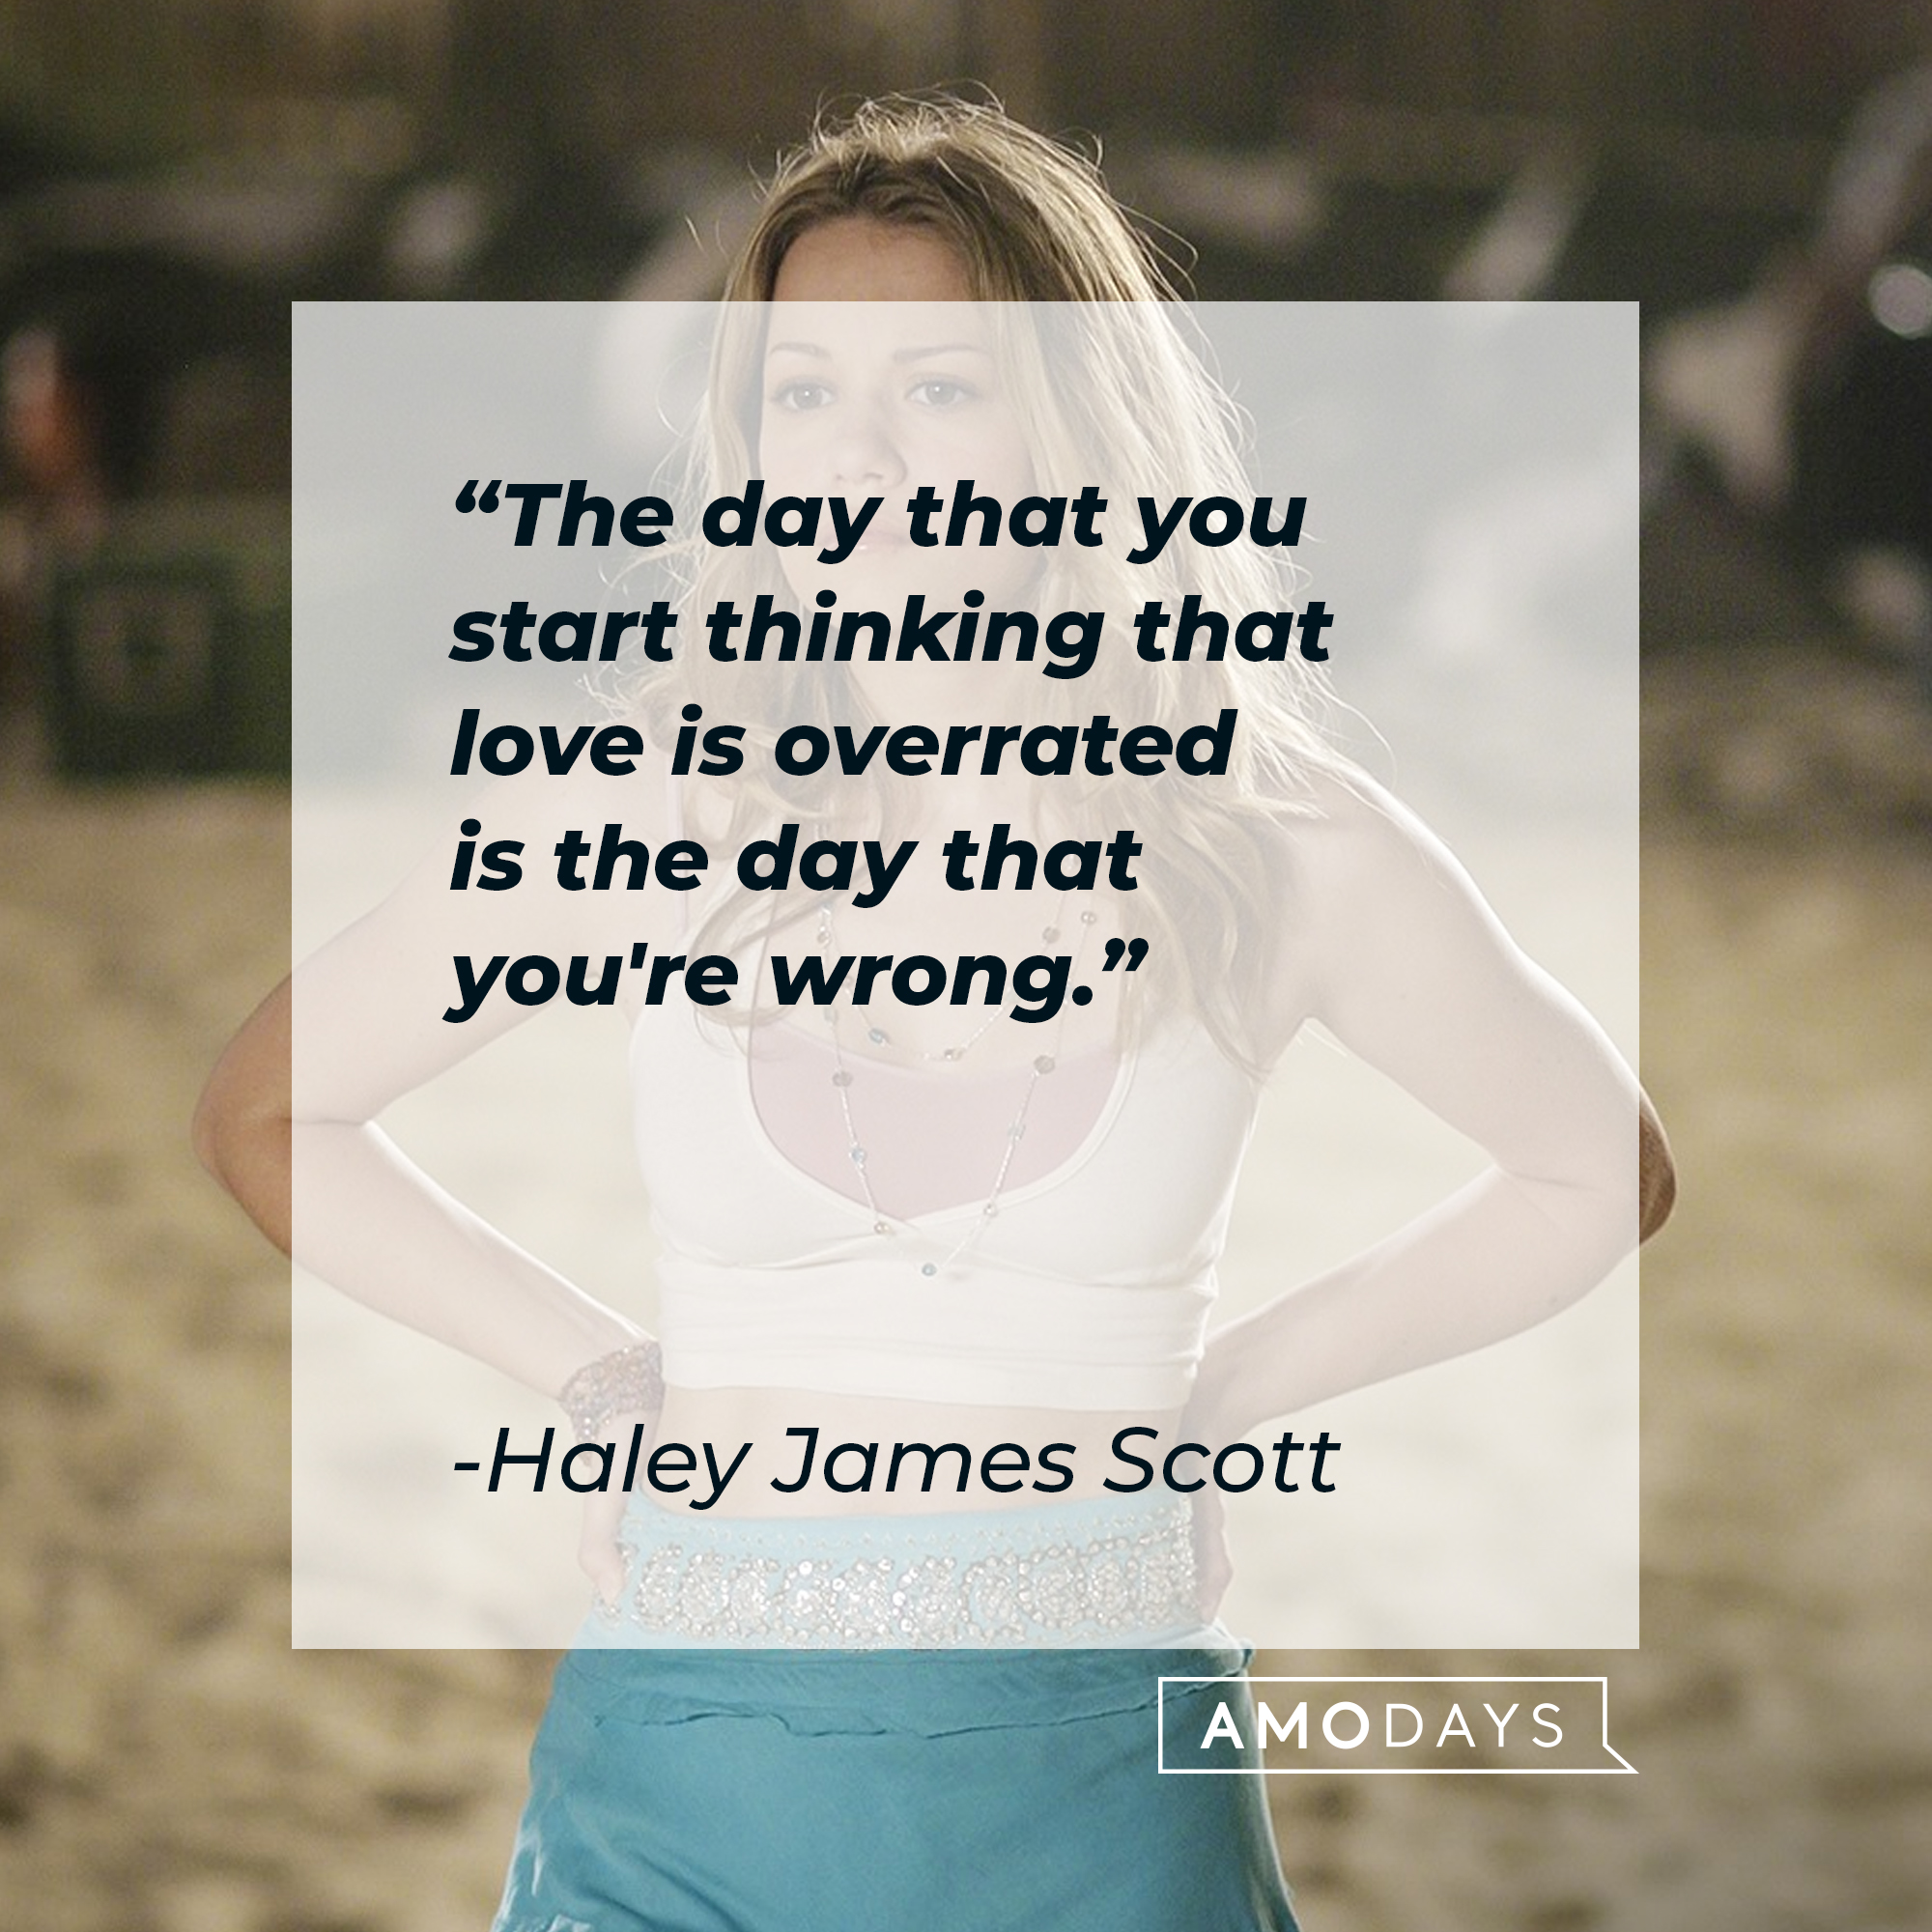 Haley James Scott with her quote, "The day that you start thinking that love is overrated is the day that you're wrong." | Source: Facebook/OneTreeHill